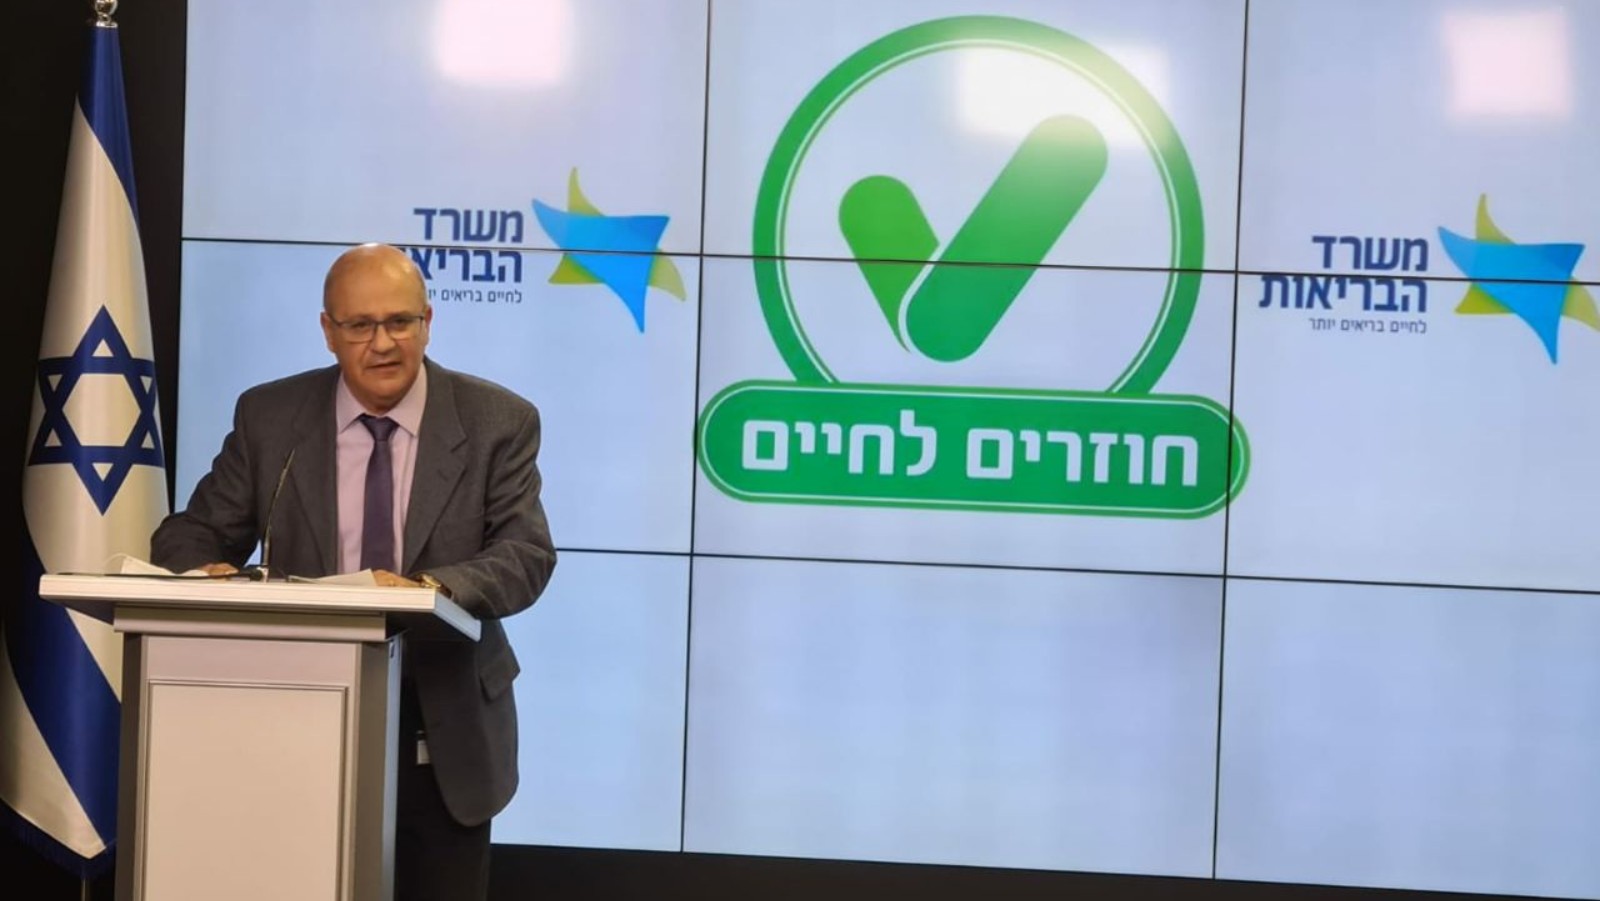 Israeli Health Ministry Director-General Dr. Chezy Levy at a press conference on February 18, 2021. Photo courtesy of the Health Ministry